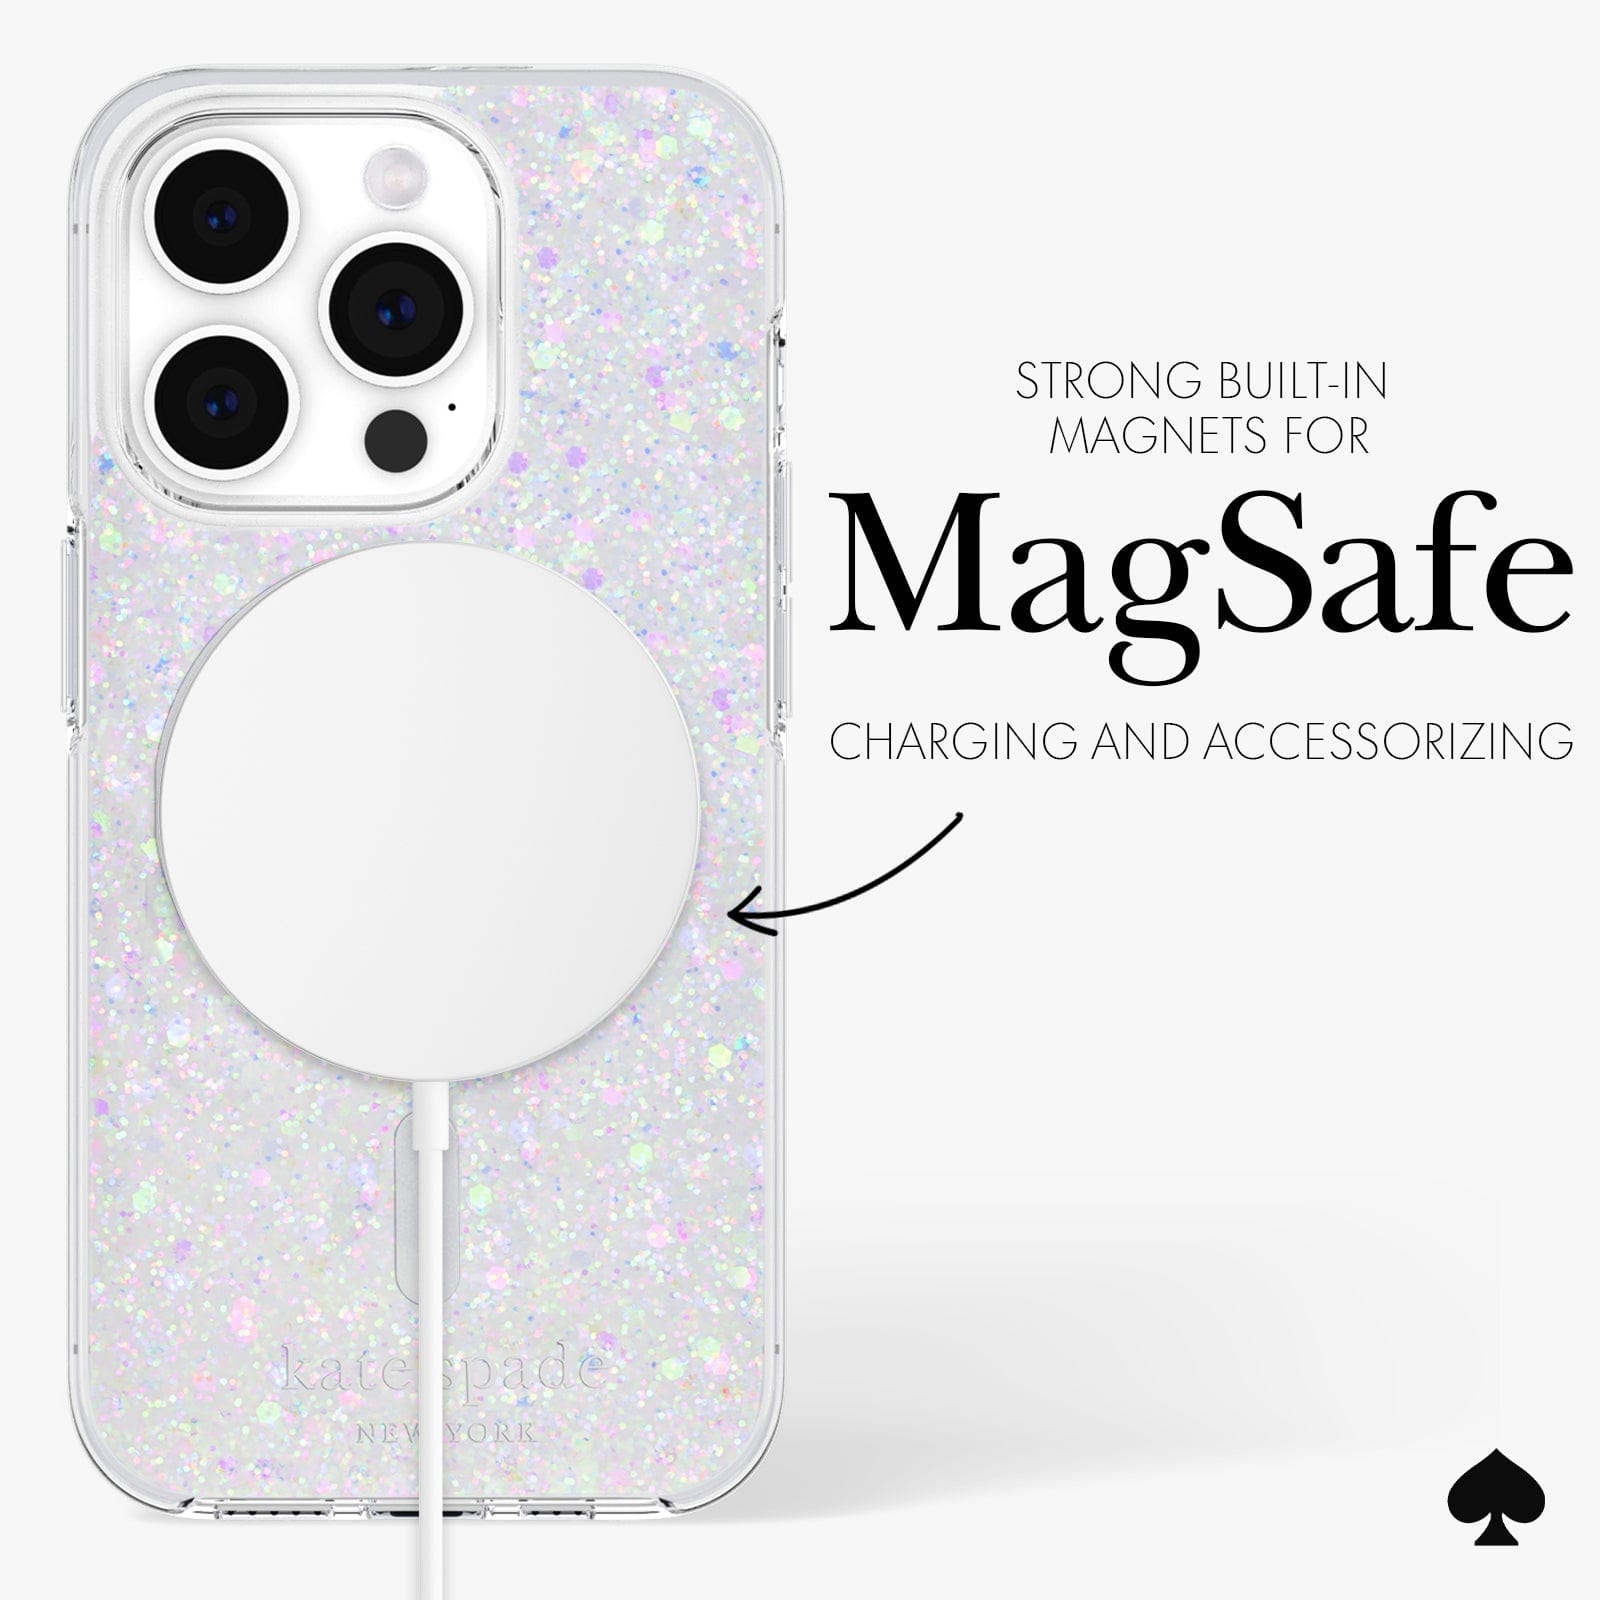 STRONG BUILT-IN MAGNETS FOR MAGSAFE CHARGING AND ACCESSORIZING